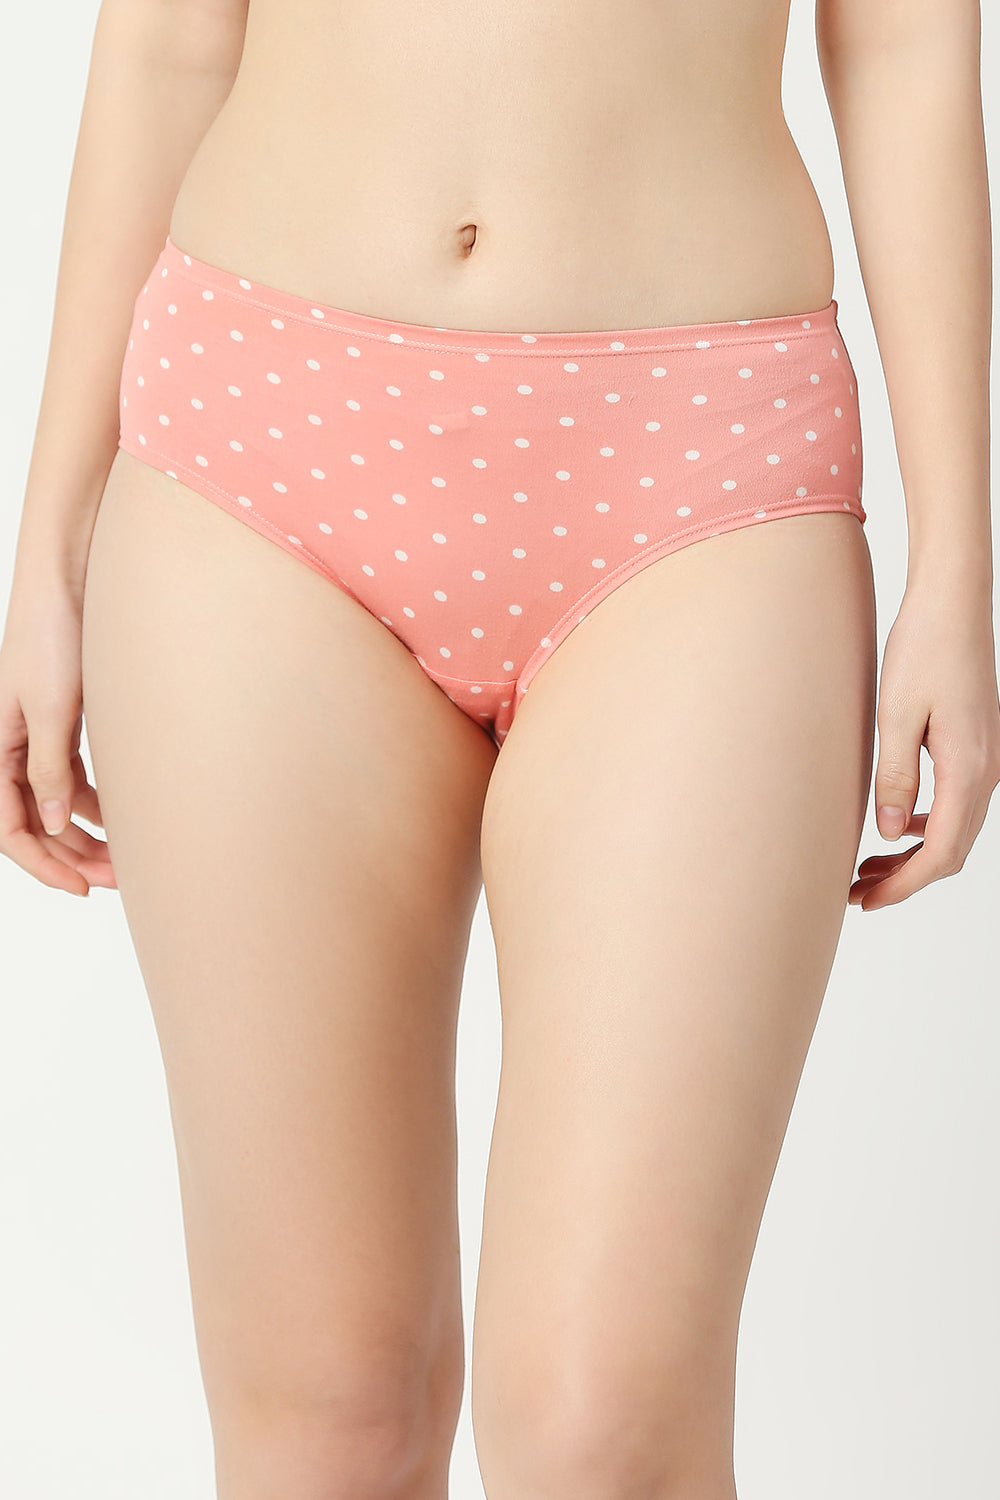 Red Rose Cotton Comfort Medium Rise, Full Coverage Hipster Panties - Multicolor Pack of 3